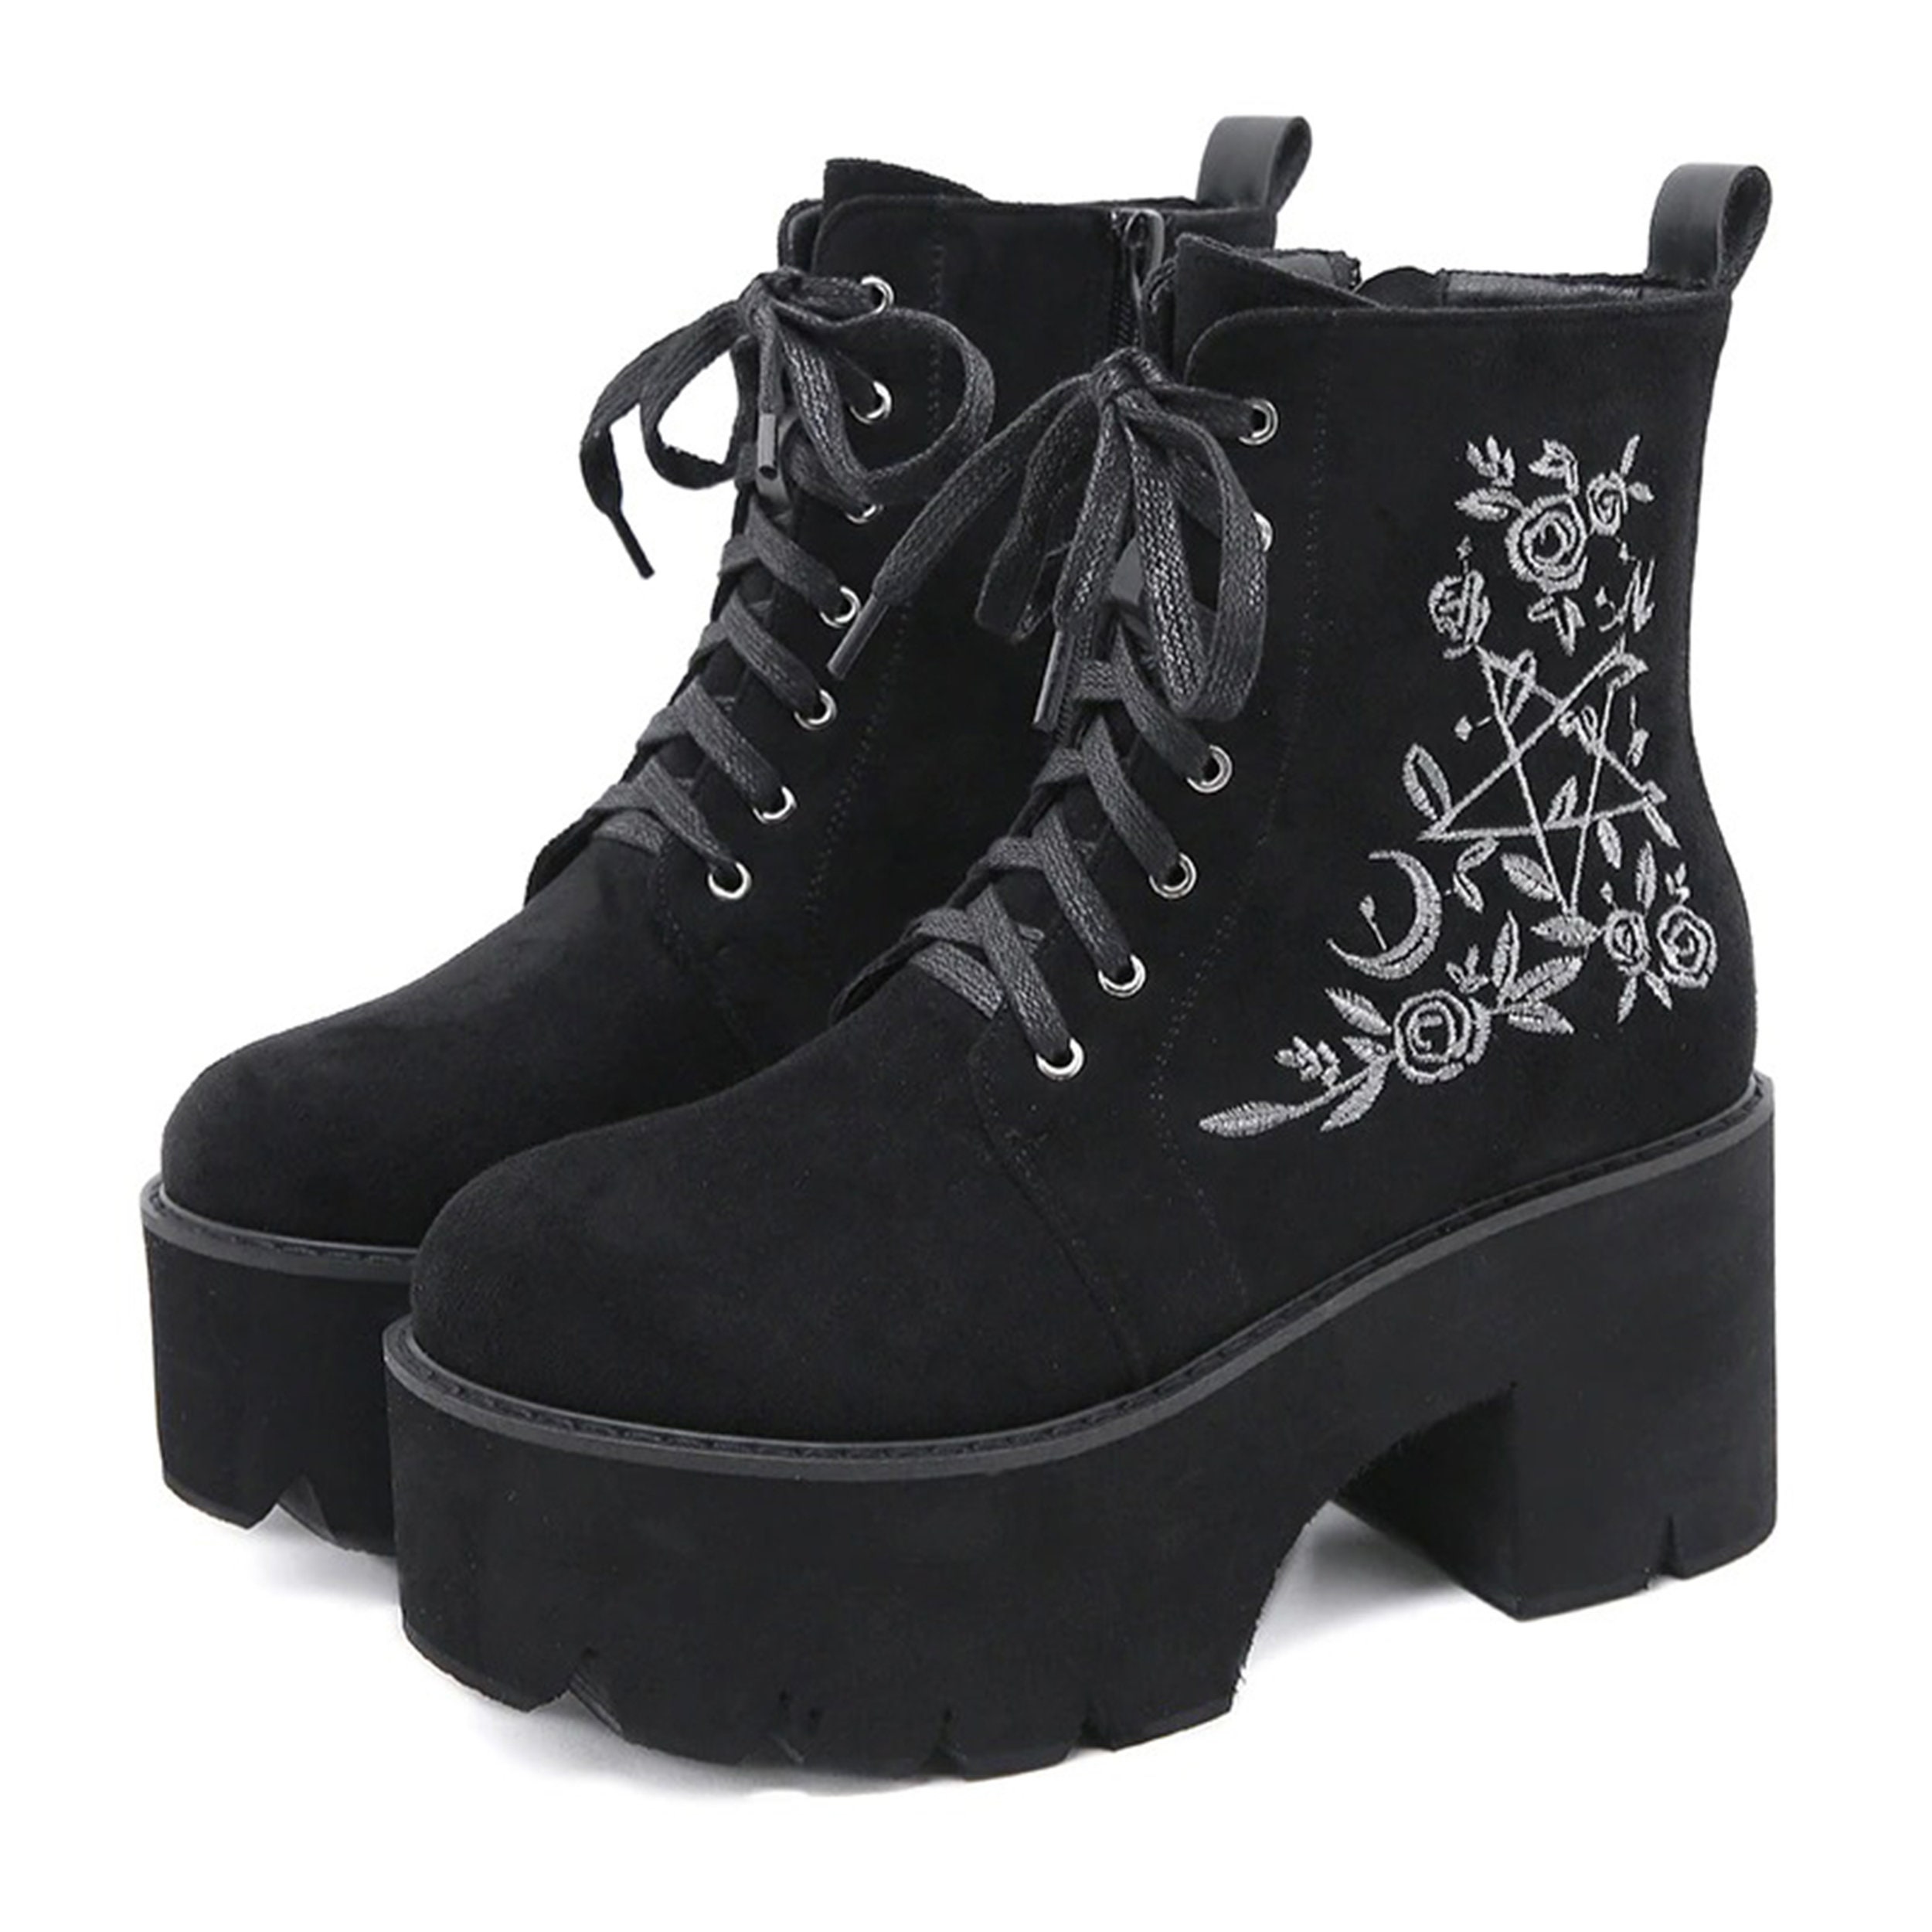 Gothic Boots Platform Shoes Chunky Shoes Extravagant Shoes Chunky Shoes Goth Shoes High Heels Vintage Platforms Lace Up Shoes